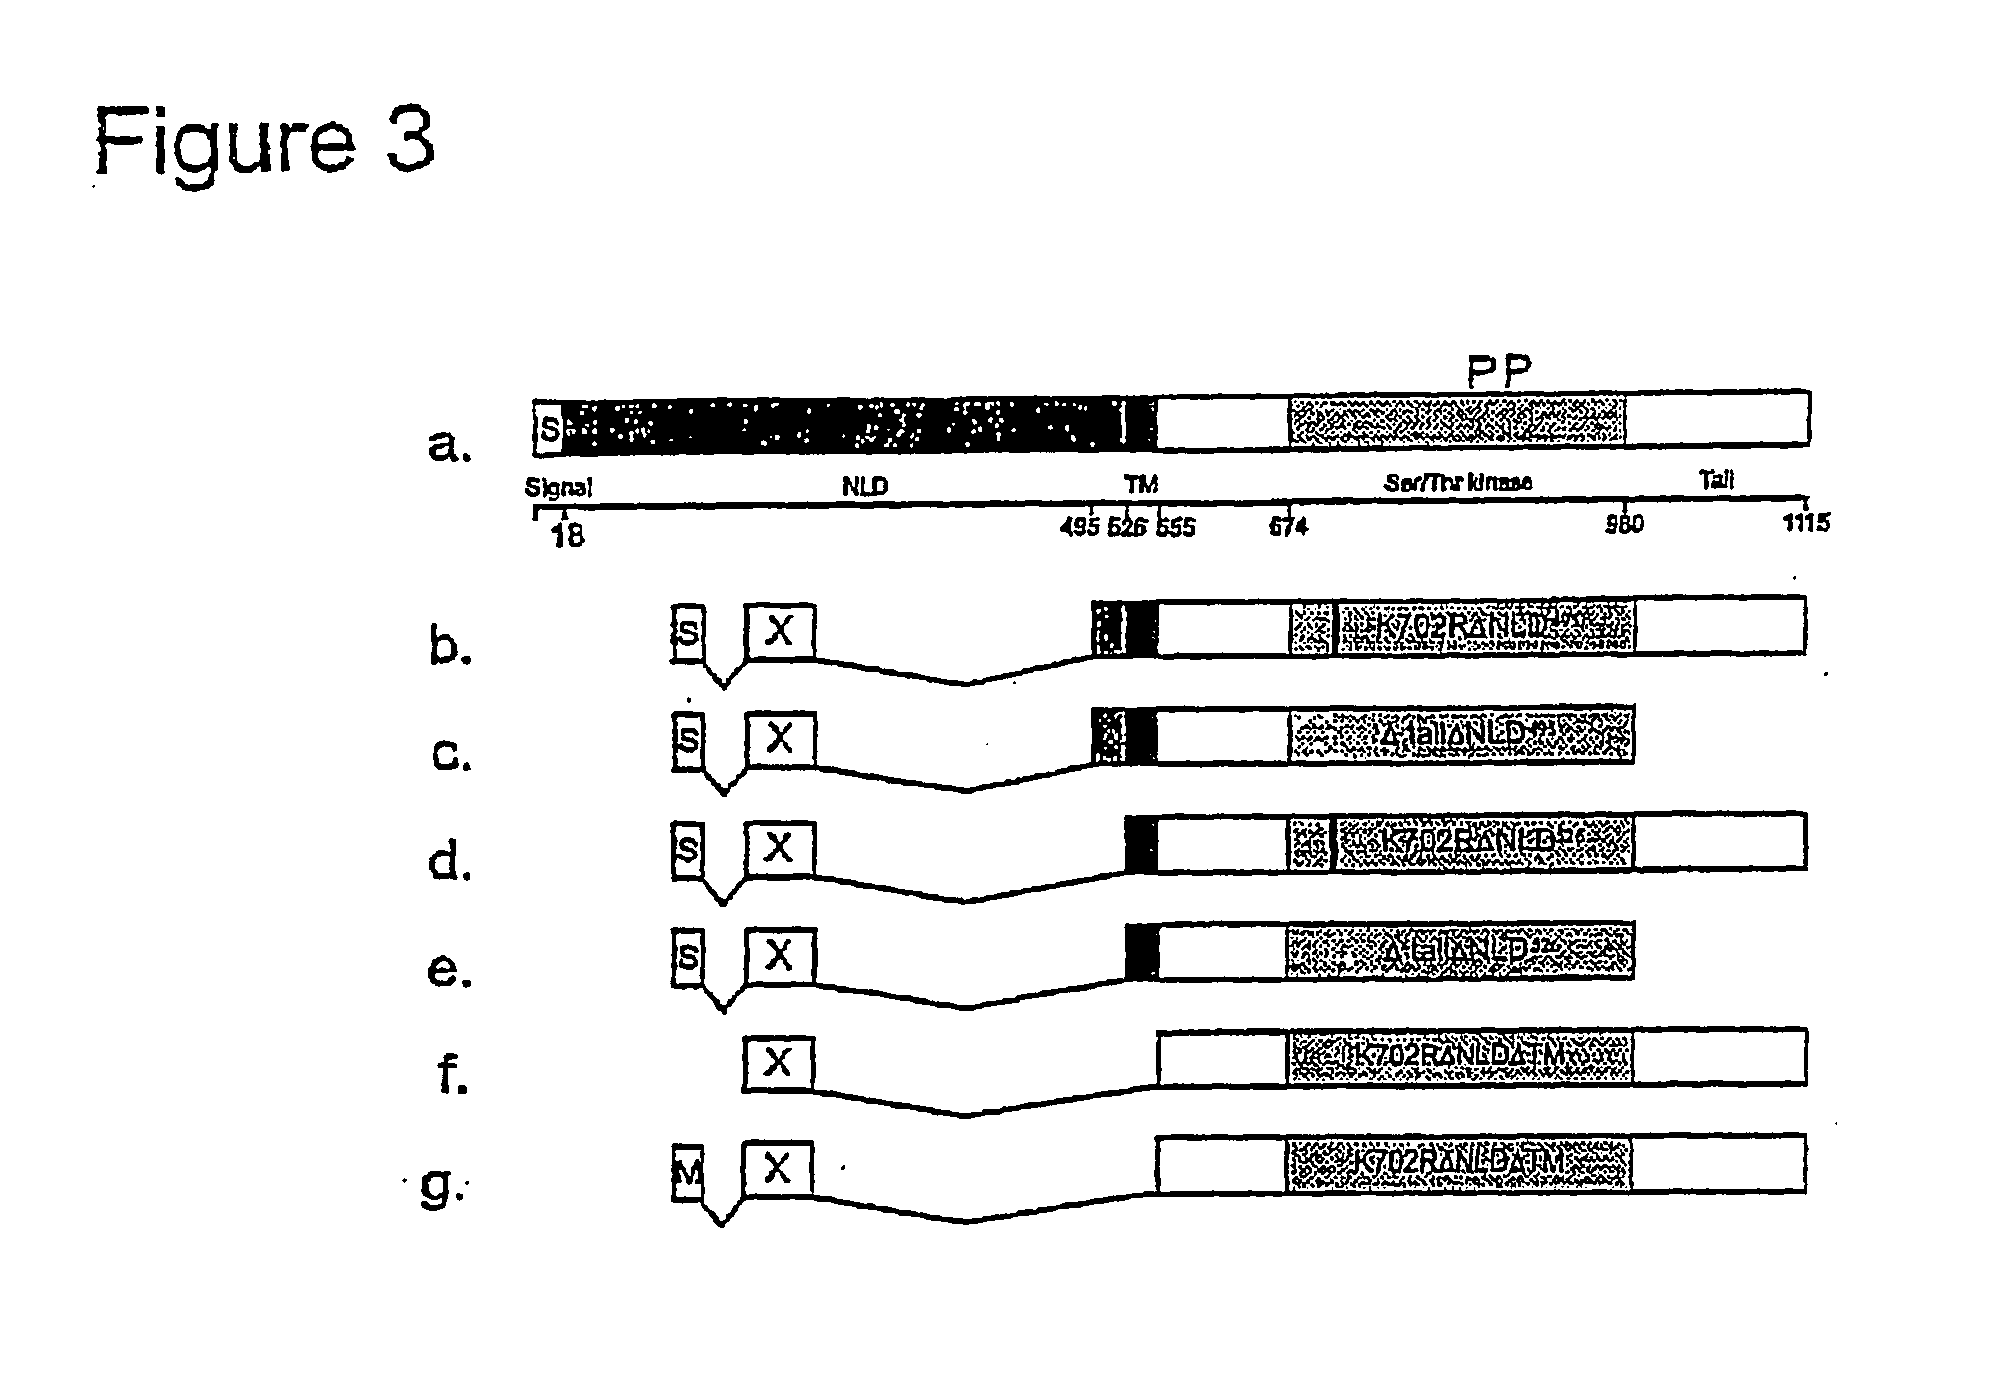 Method for identifying protein-protein interactions